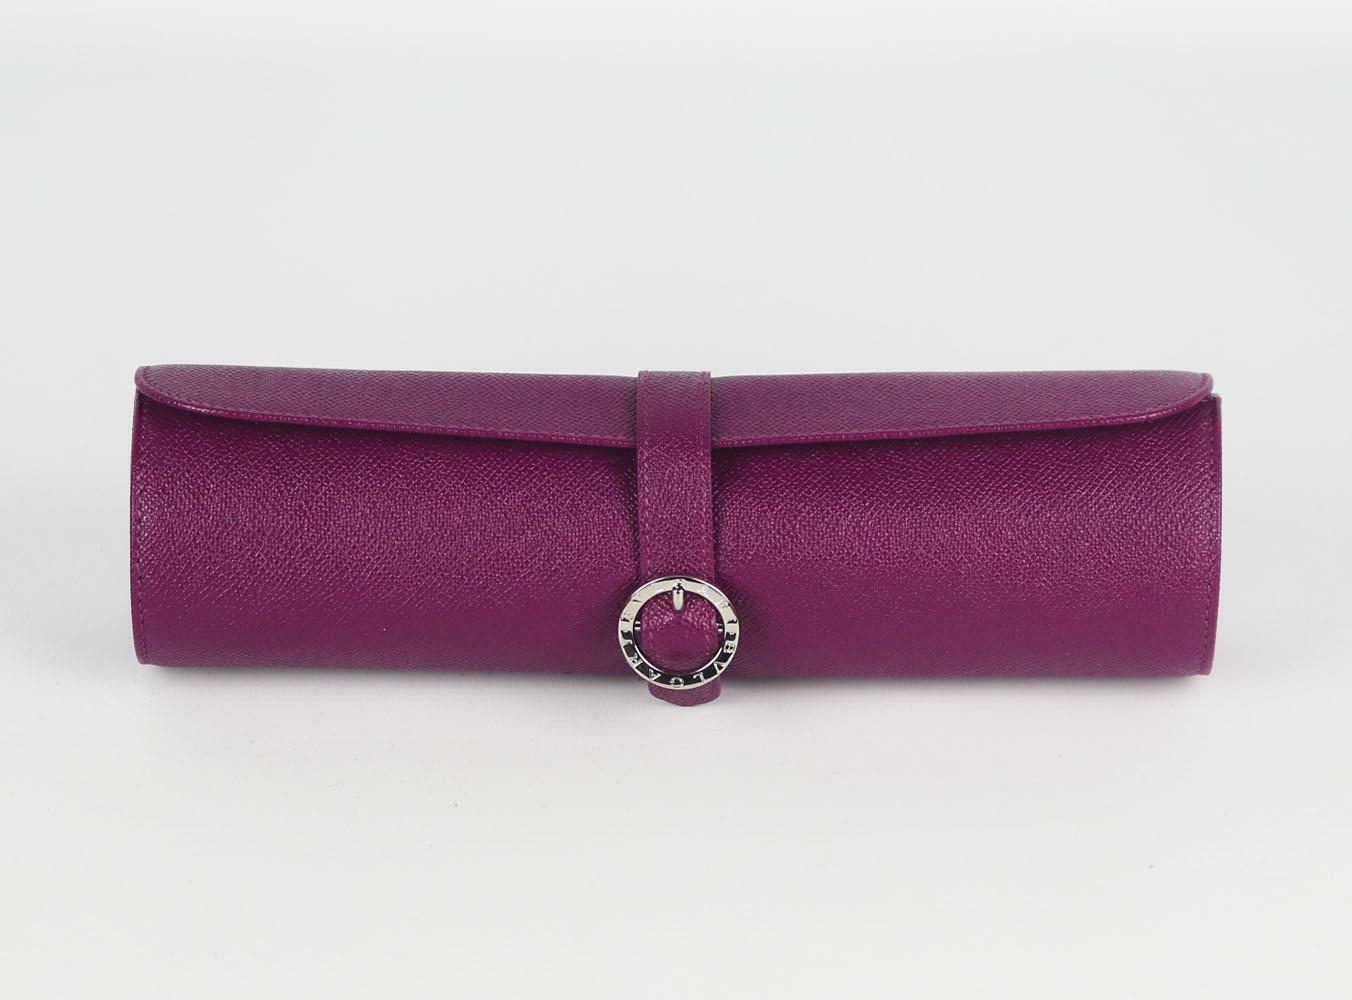 Made in Italy, this Bvlgari watch roll has been made from purple textured-leather exterior with soft fabric interior, this piece is decorated with Bvlgari stamped logo on either side and finished with a silver-toned logo buckle. 
Purple